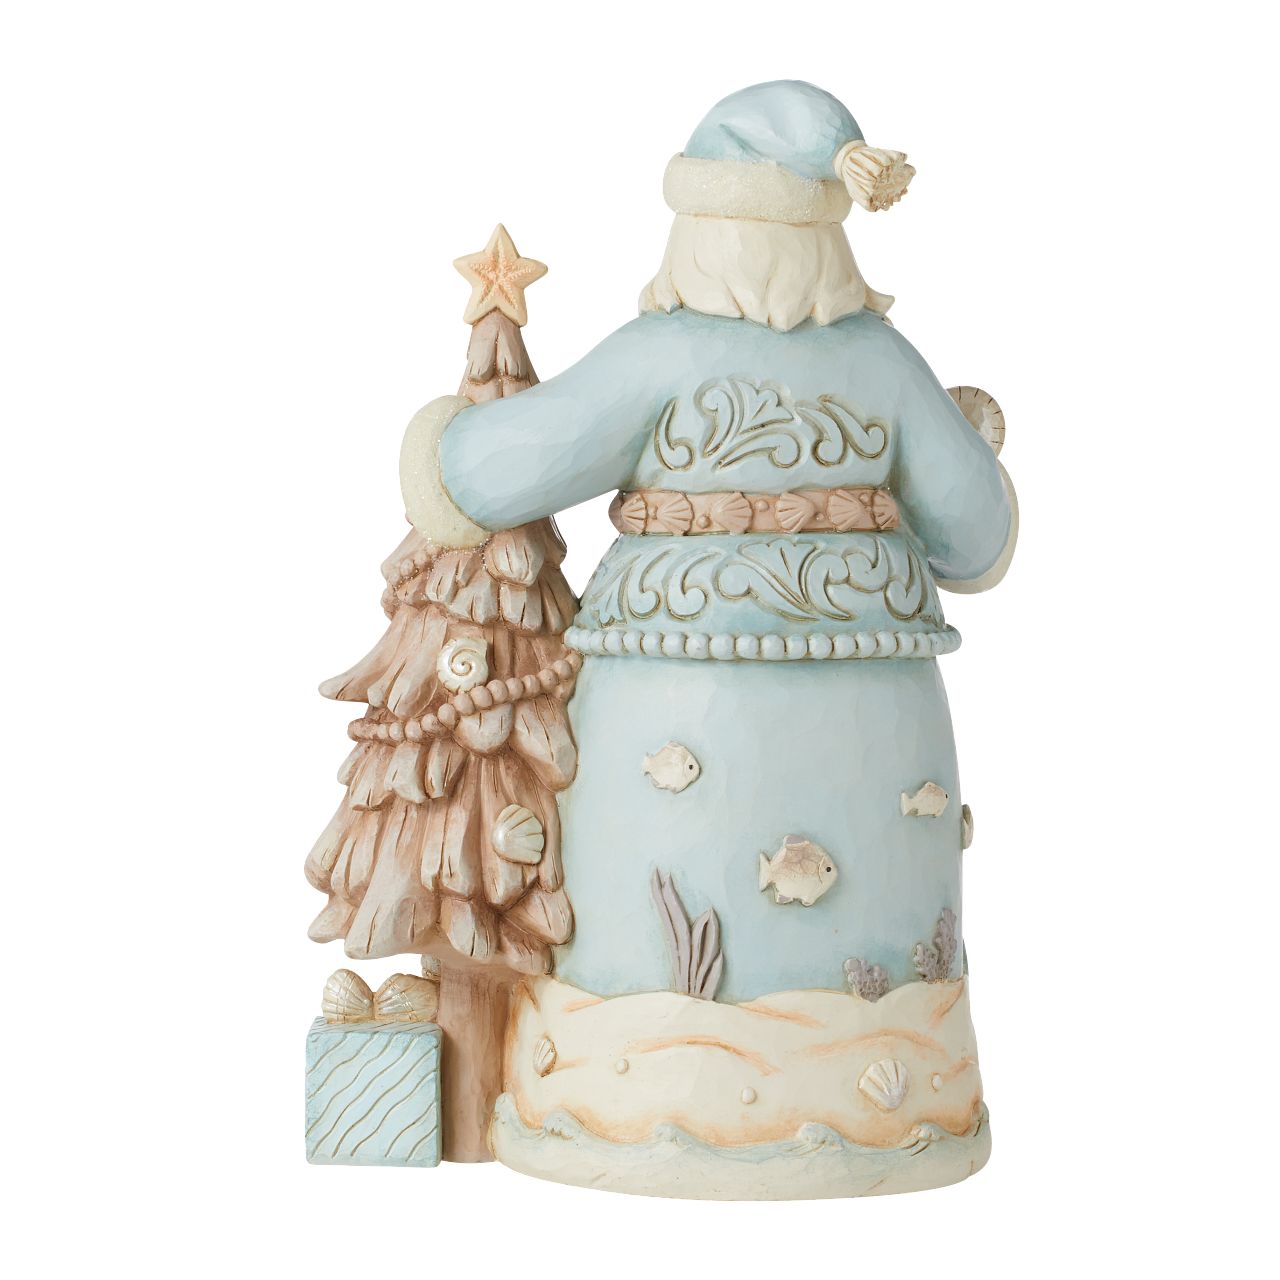 Santa with Starfish Tree Figurine  The joy of Christmas festivities meets the relaxing calm of the sea in this Costal Collection for Heartwood Creek by Jim Shore. This stunning Santa in blue adorned with shells and coral is truly delightful.